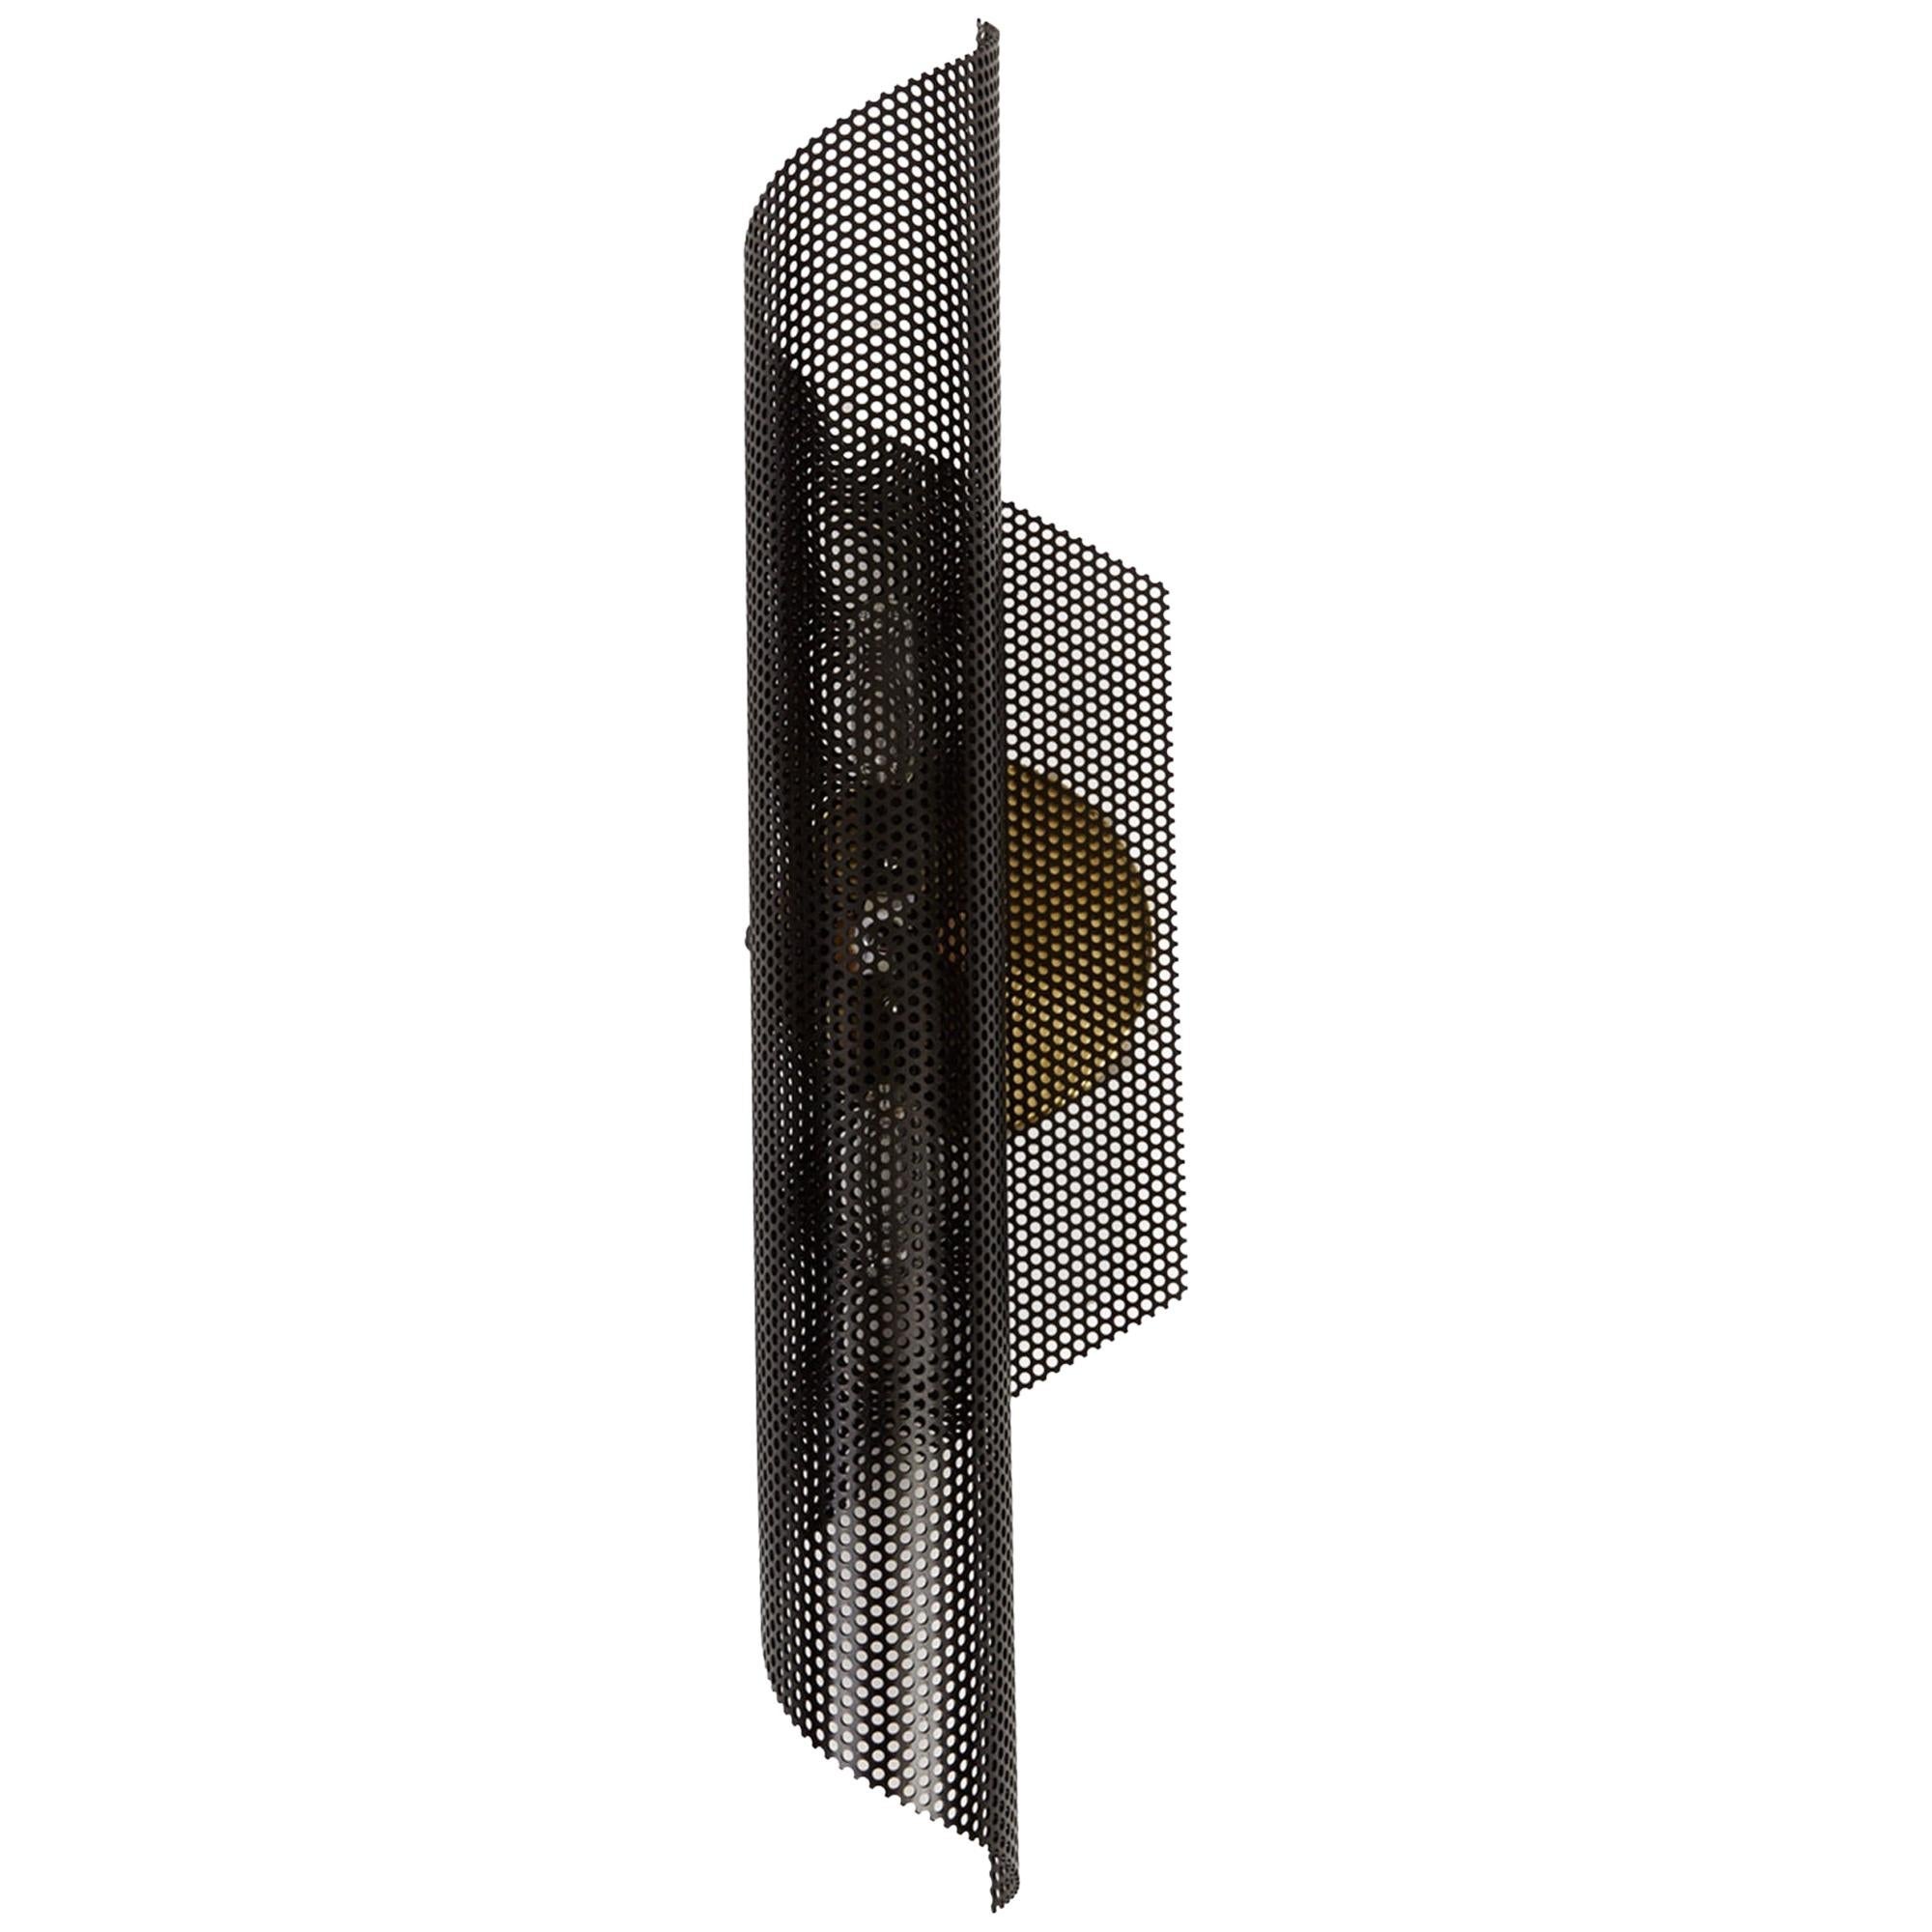 Black Rolled Perforated Sconce by Lawson-Fenning